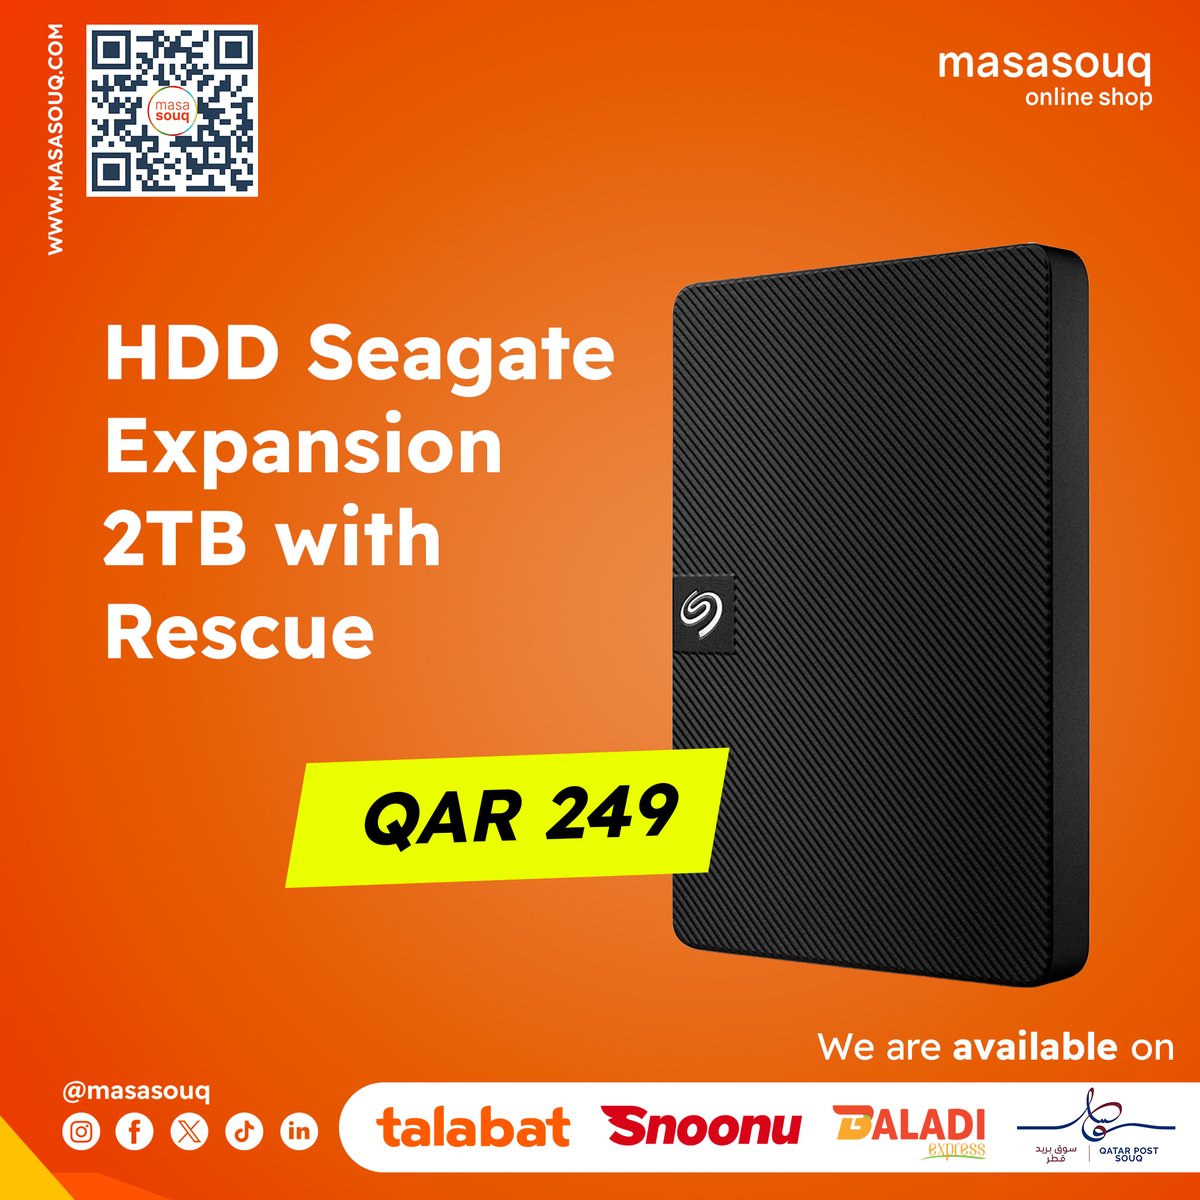 Tired of running out of space? 🤔 Upgrade your storage with the Seagate Expansion 2TB HDD! Enjoy reliable backups, extra room for photos, videos, and more.   only QAR249  👉 masasouq.com/hdd-seagate-ex…

#techupgrade #storage #Seagate #organization #datasafe #Masasouq